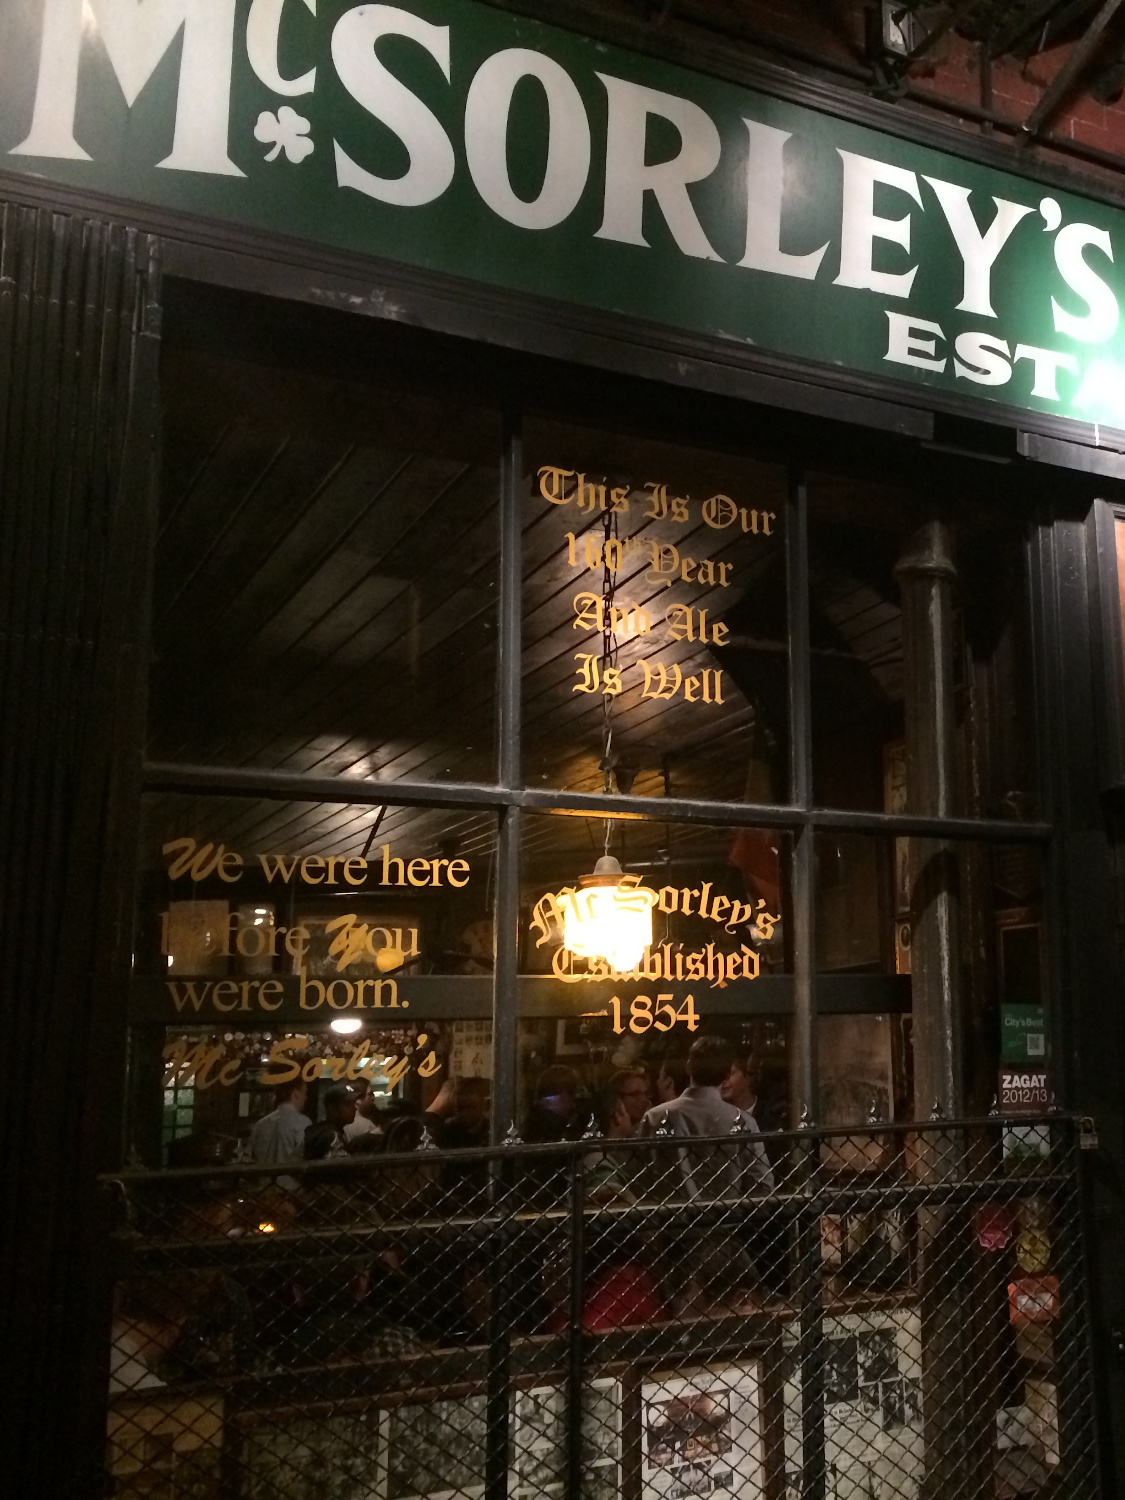 Mcsorley's Ale House